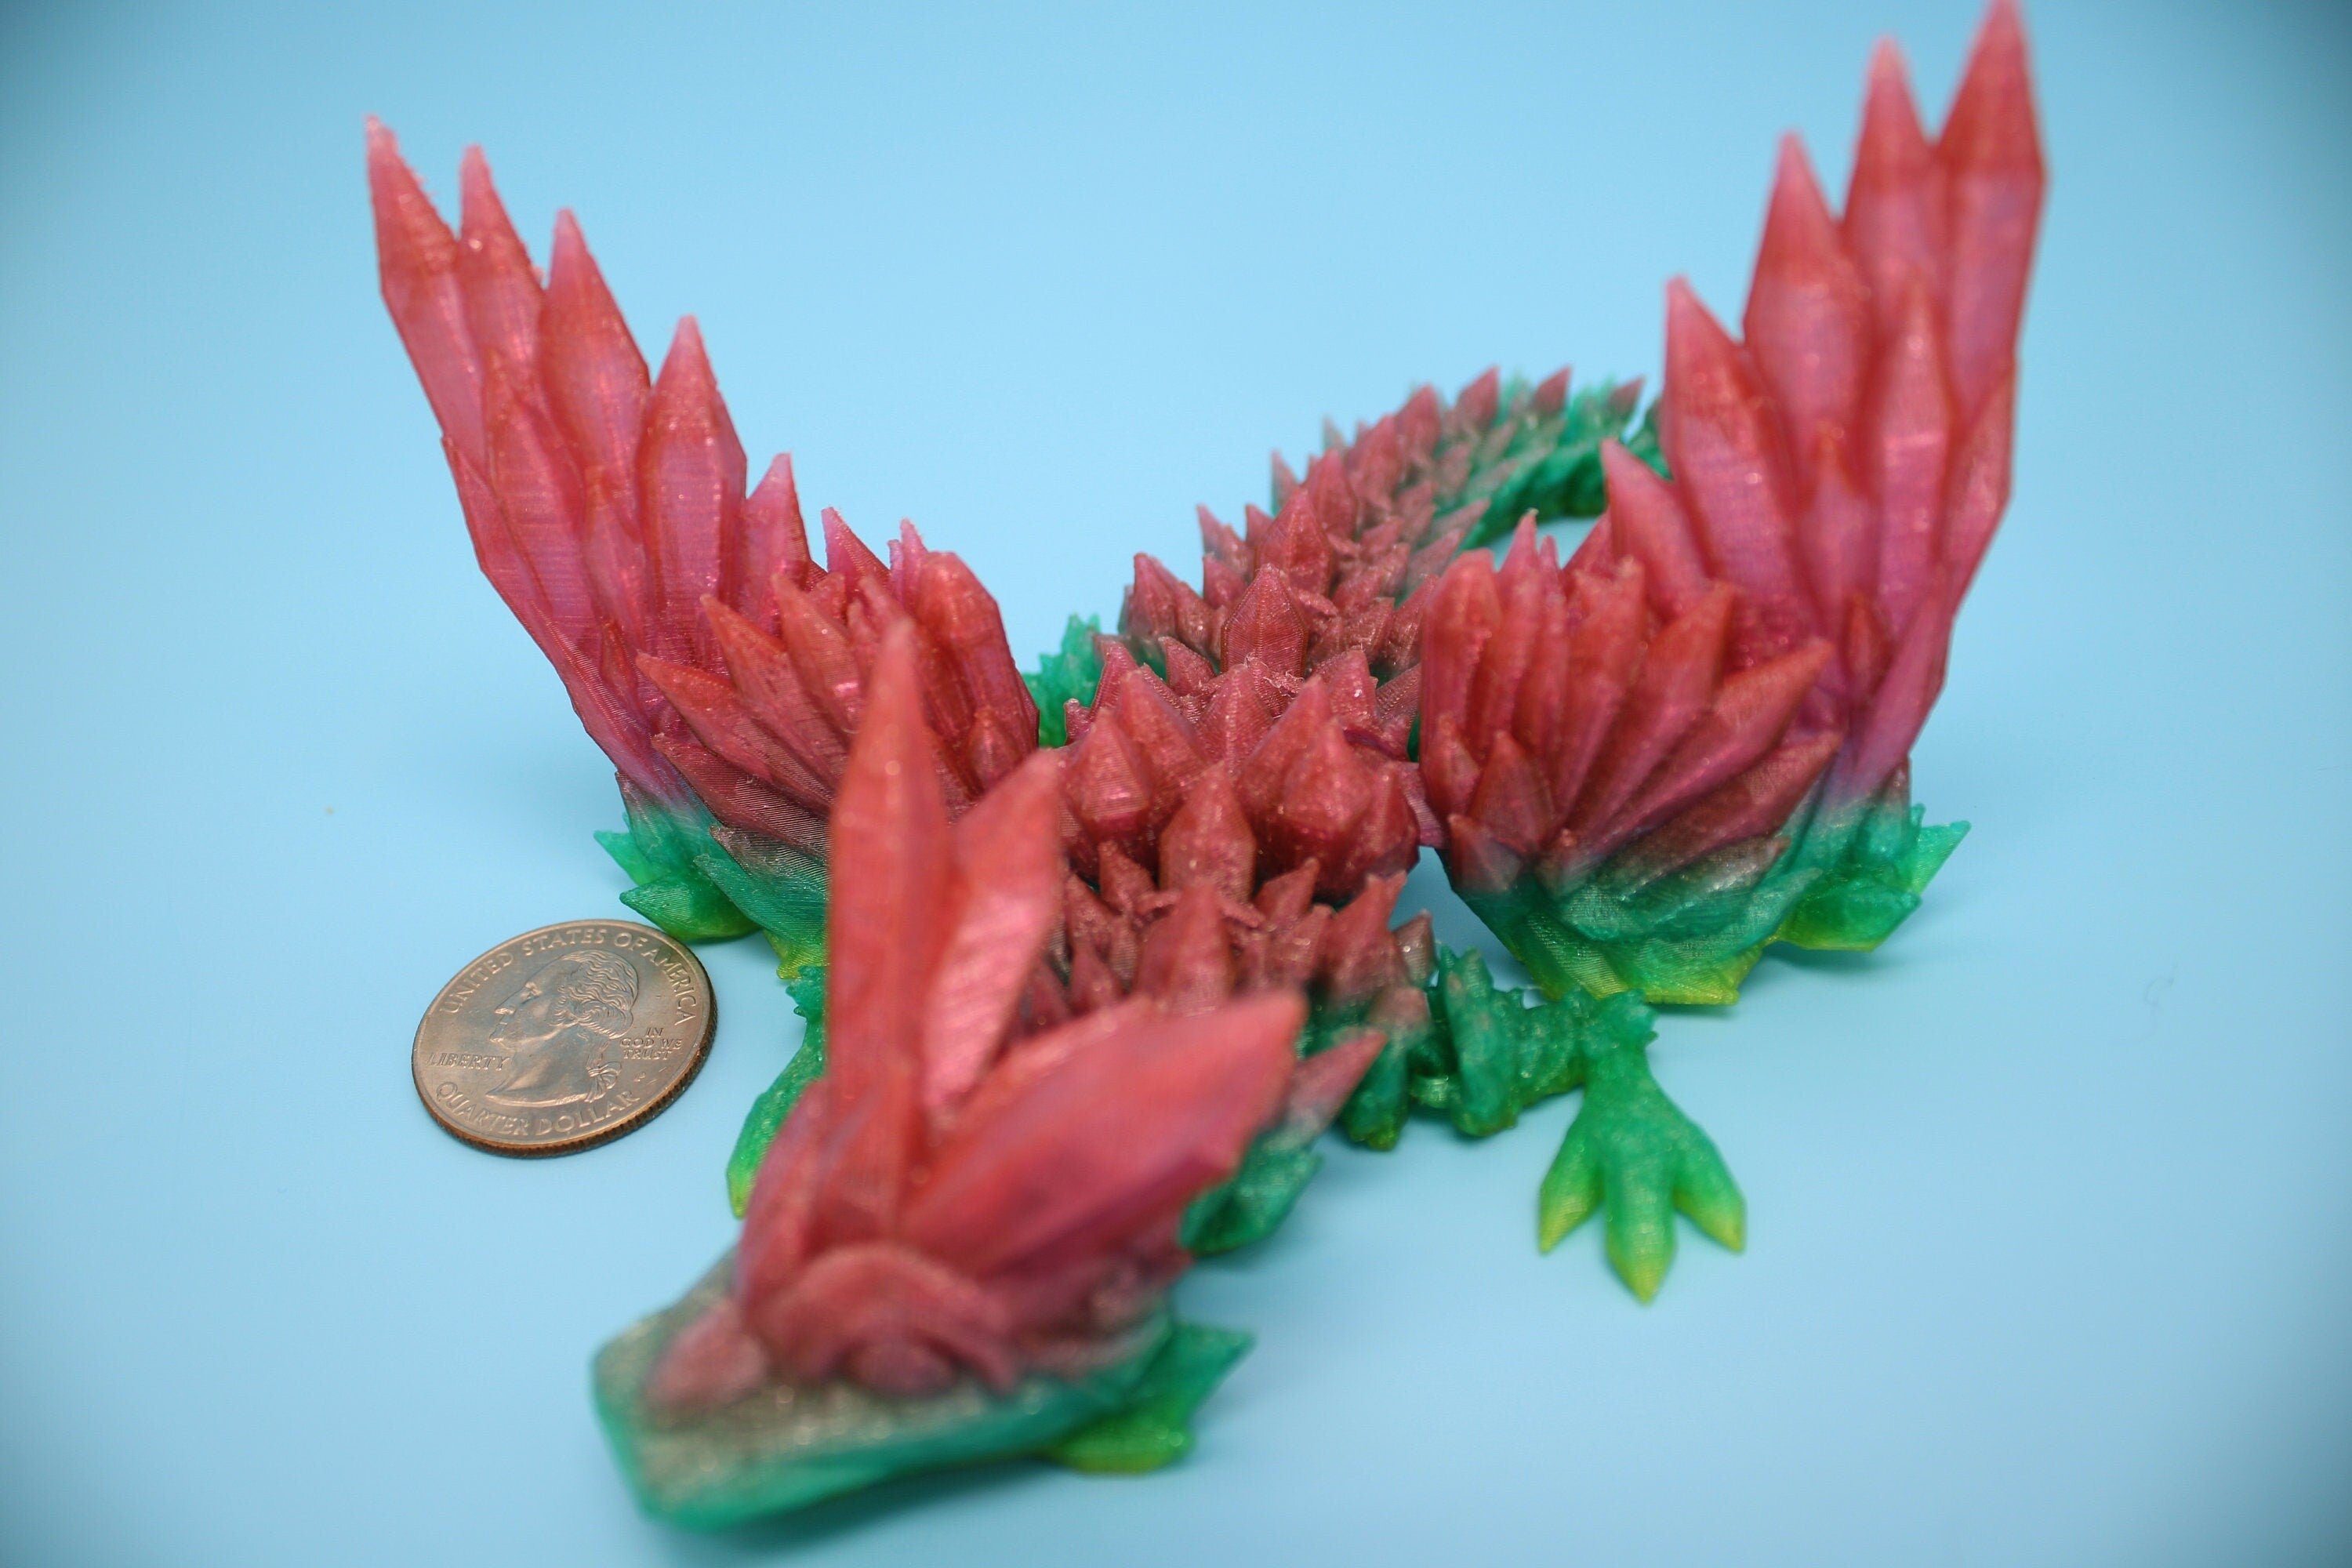 Flexible Miniature Baby Crystal Winged Dragon | Rainbow | 3D Printed Articulating Toy Fidget | Flexi Toy 7 in. head to tail | Stress Relief